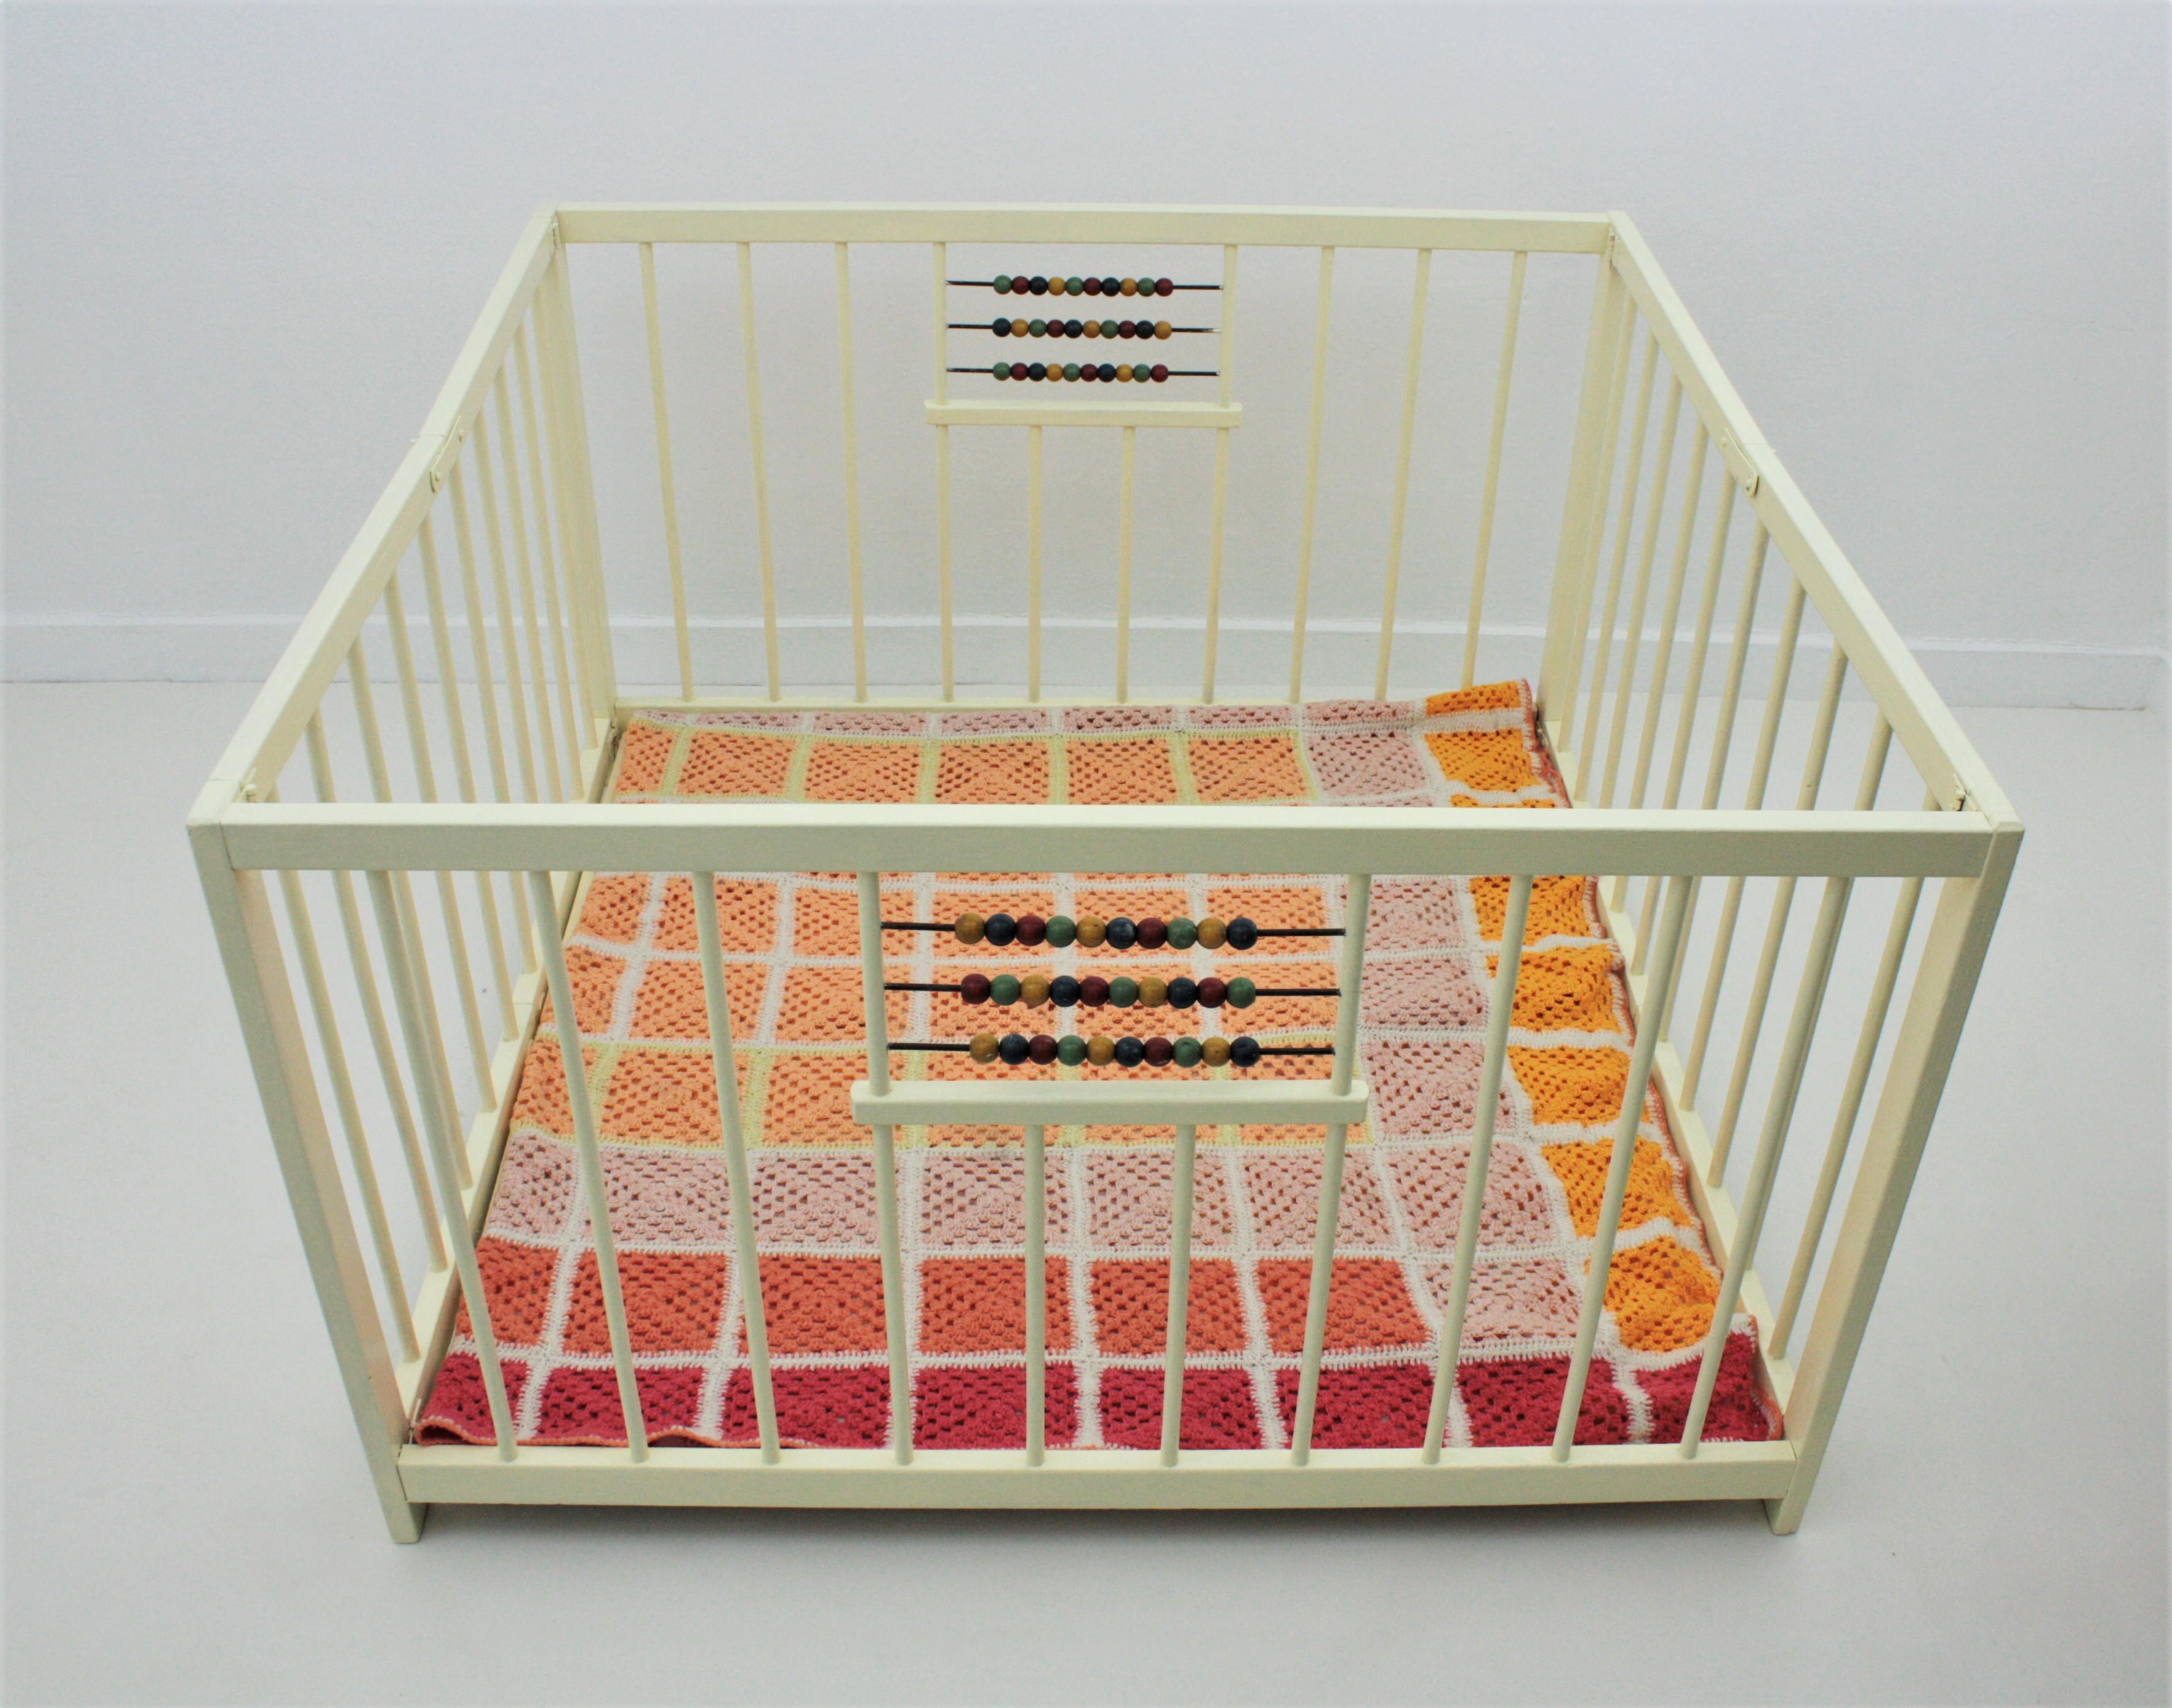 A lovely wood painted folding kids crib playpen with abacus toys at both sides. Spain, 1940s-1950s
Easy to fold to store it.
It is useful as portable crib or playpen.
The crochet blanket is included
Measures:
Open 106 cm W x 106 cm D x 66 cm